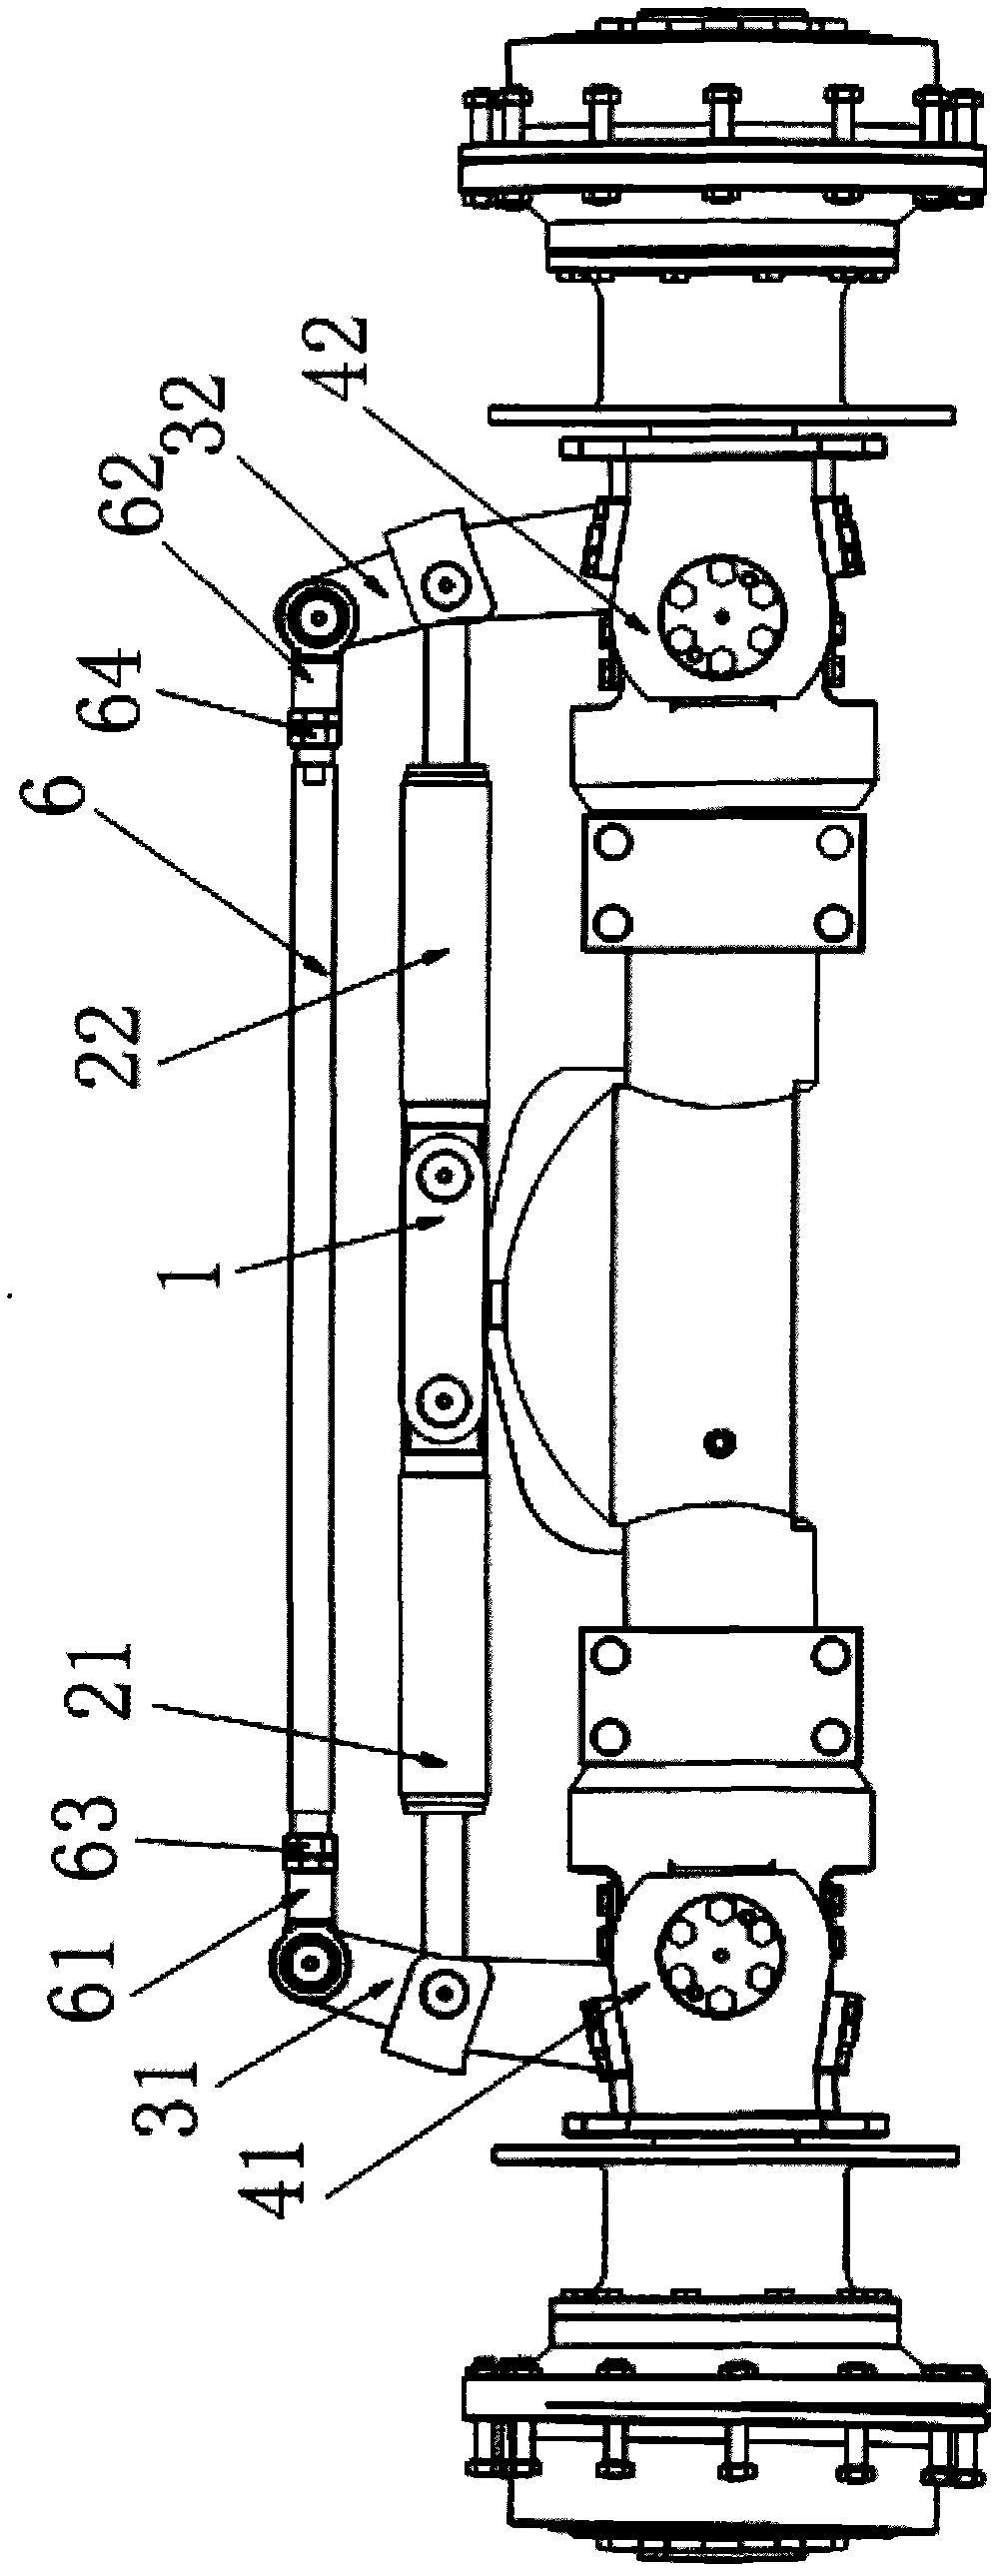 Veering driving assembly for rear axle rim tire